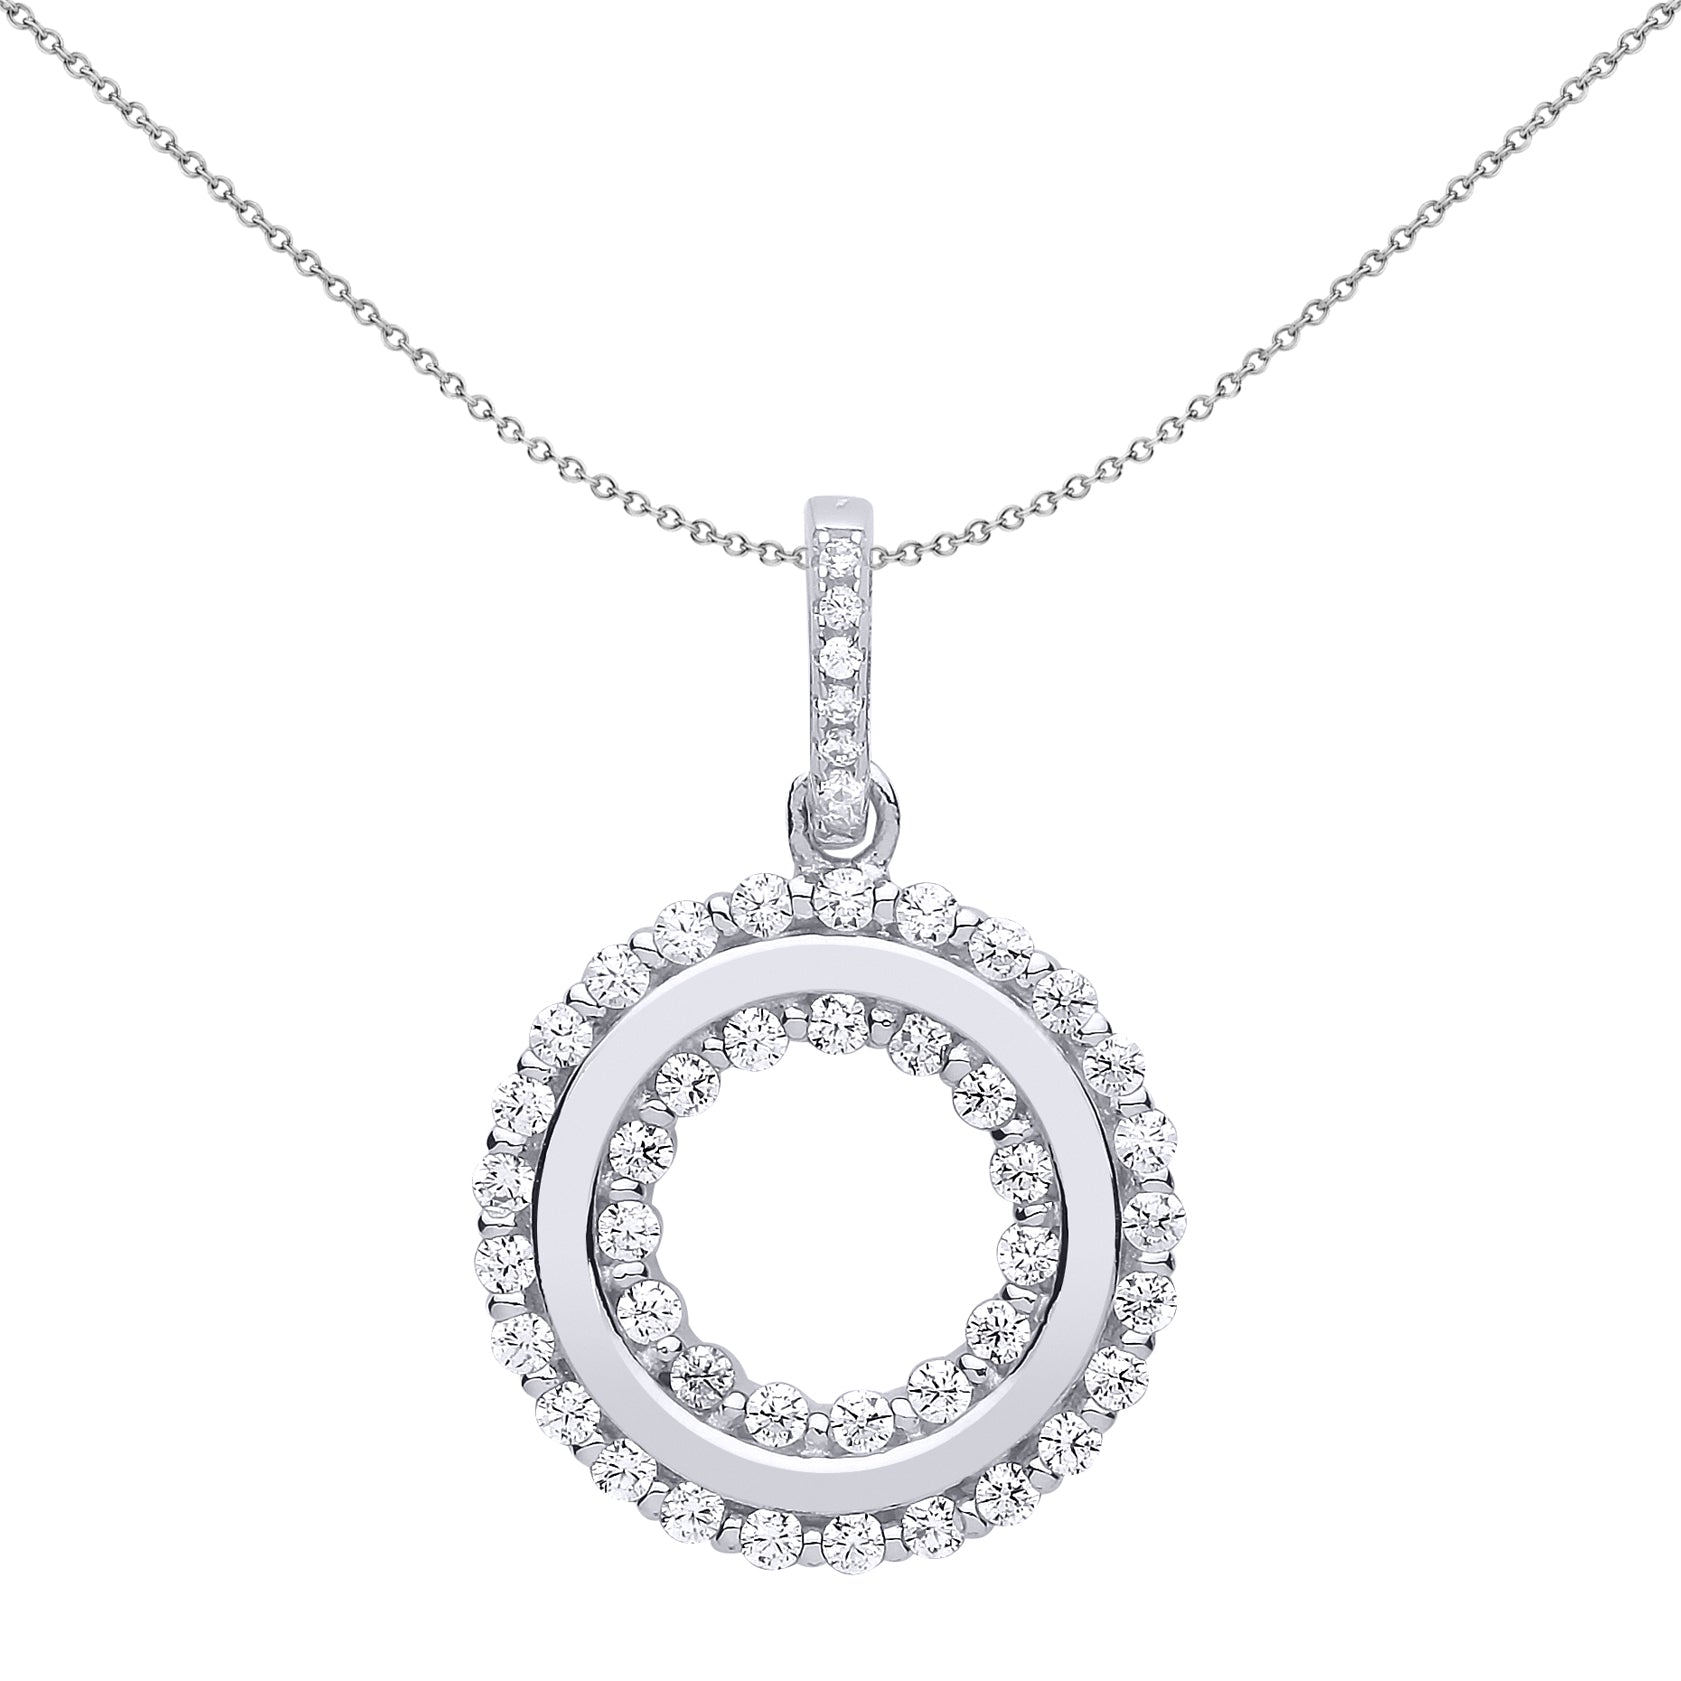 Silver  CZ Halo Donut Ring Pendant Necklace 18 inch - GVP515